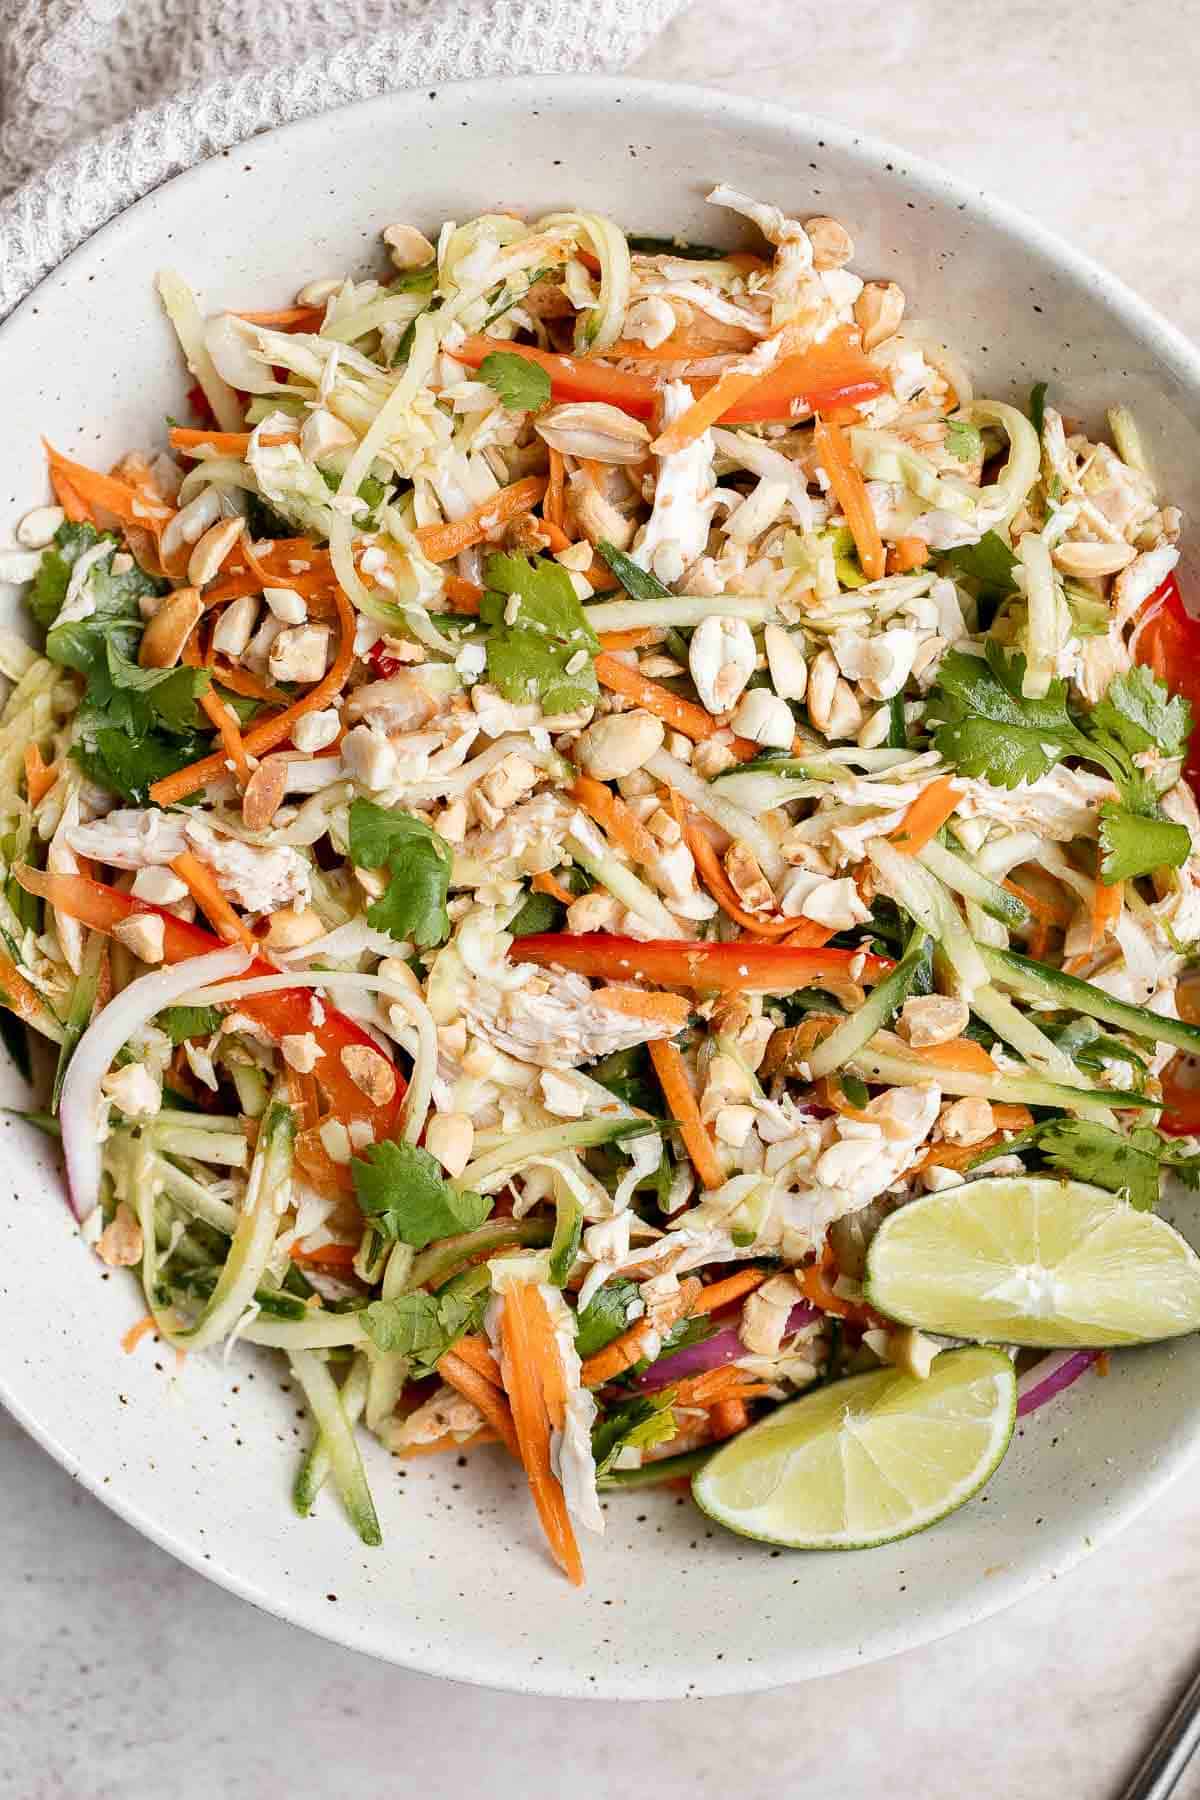 Vietnamese chicken salad (known as goi ga) made with shredded chicken and nuoc cham dressing is a fresh, tangy salad full of flavor, color, and texture. | aheadofthyme.com